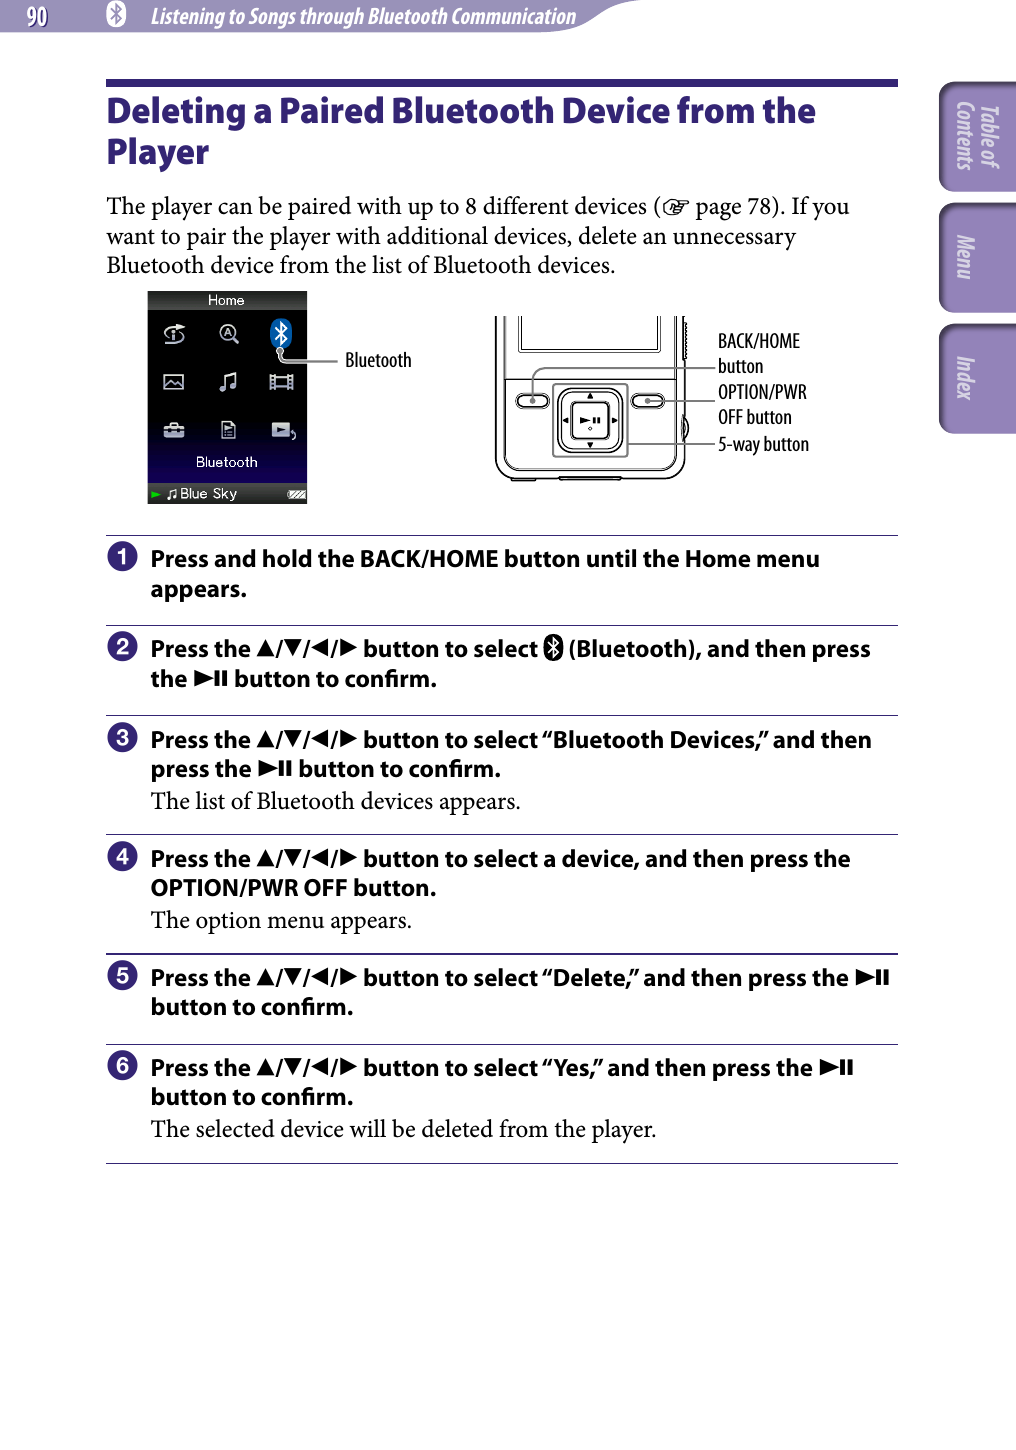 90 90 NWZ-A826 / A 828 / A829.GB.3-289-807-11(1) Listening to Songs through Bluetooth CommunicationDeleting a Paired Bluetooth Device from the PlayerThe player can be paired with up to 8 different devices ( page 78). If you want to pair the player with additional devices, delete an unnecessary Bluetooth device from the list of Bluetooth devices.OPTION/PWR OFF buttonBACK/HOME button5-way buttonBluetooth  Press and hold the BACK/HOME button until the Home menu appears.  Press the /// button to select   (Bluetooth), and then press the  button to conrm.  Press the /// button to select “Bluetooth Devices,” and then press the  button to conrm.The list of Bluetooth devices appears.  Press the /// button to select a device, and then press the OPTION/PWR OFF button.The option menu appears.  Press the /// button to select “Delete,” and then press the  button to conrm.  Press the /// button to select “Yes,” and then press the  button to conrm. The selected device will be deleted from the player.Table of Contents Menu Index